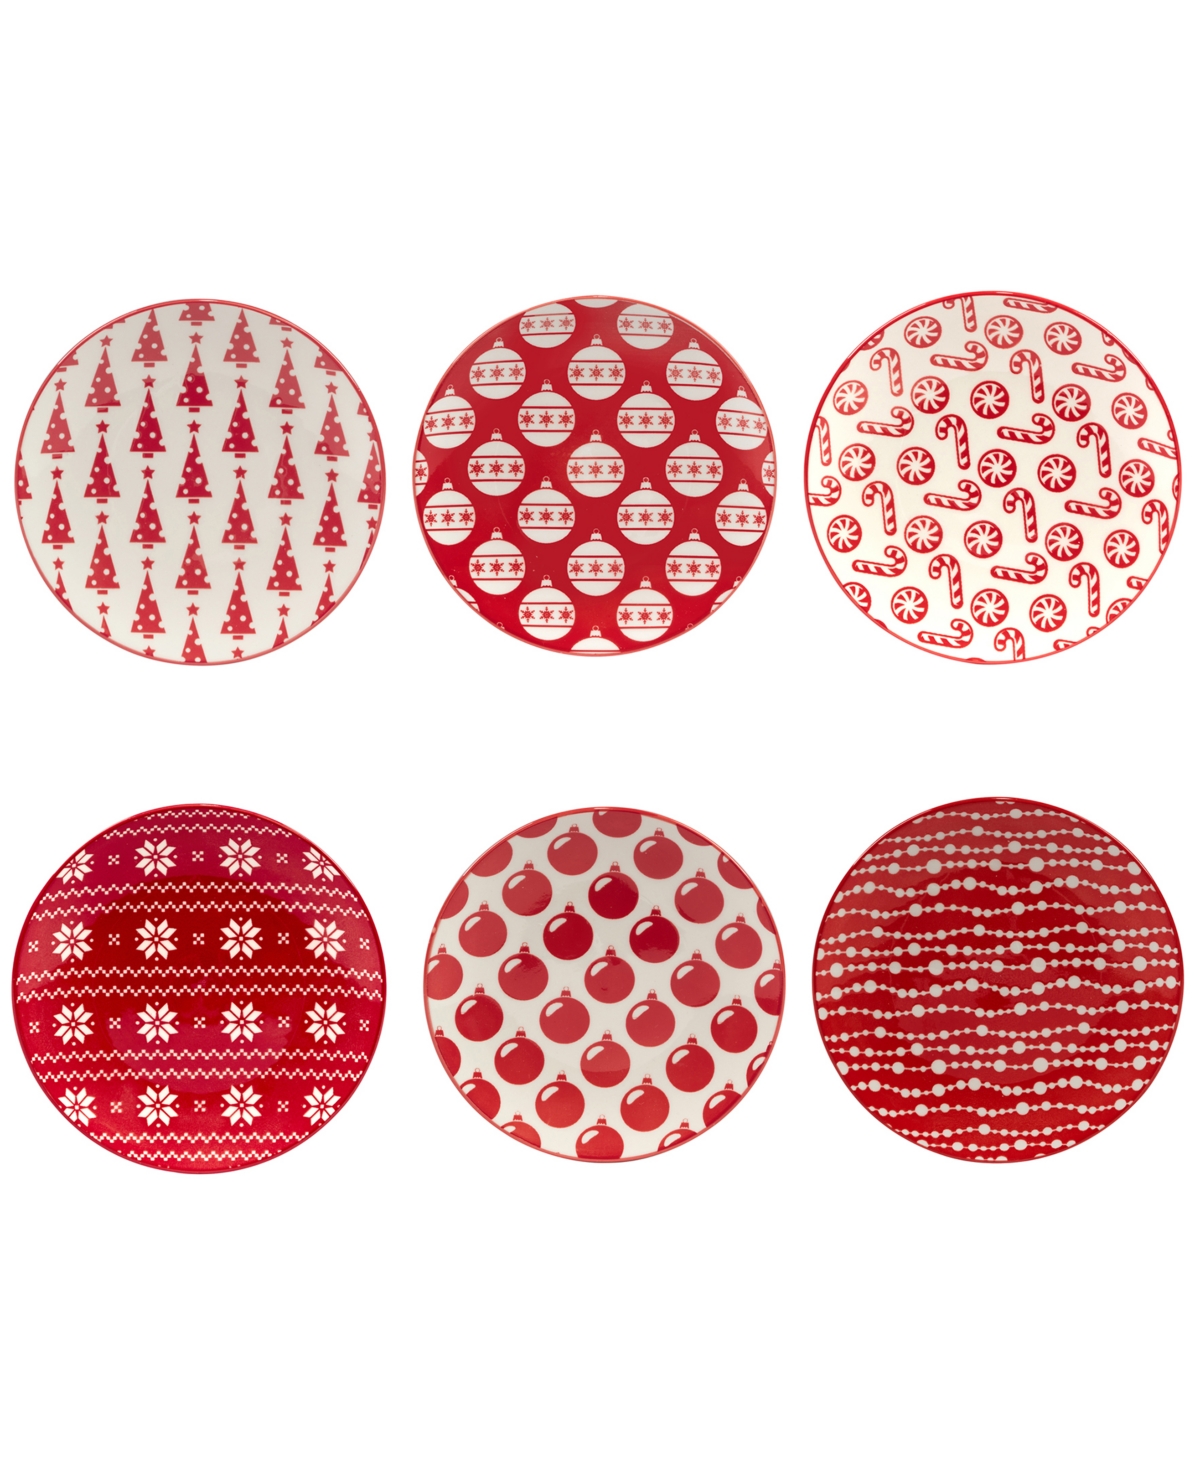 Peppermint Candy 6" Canape Plates Set of 6, Service for 6 - Red